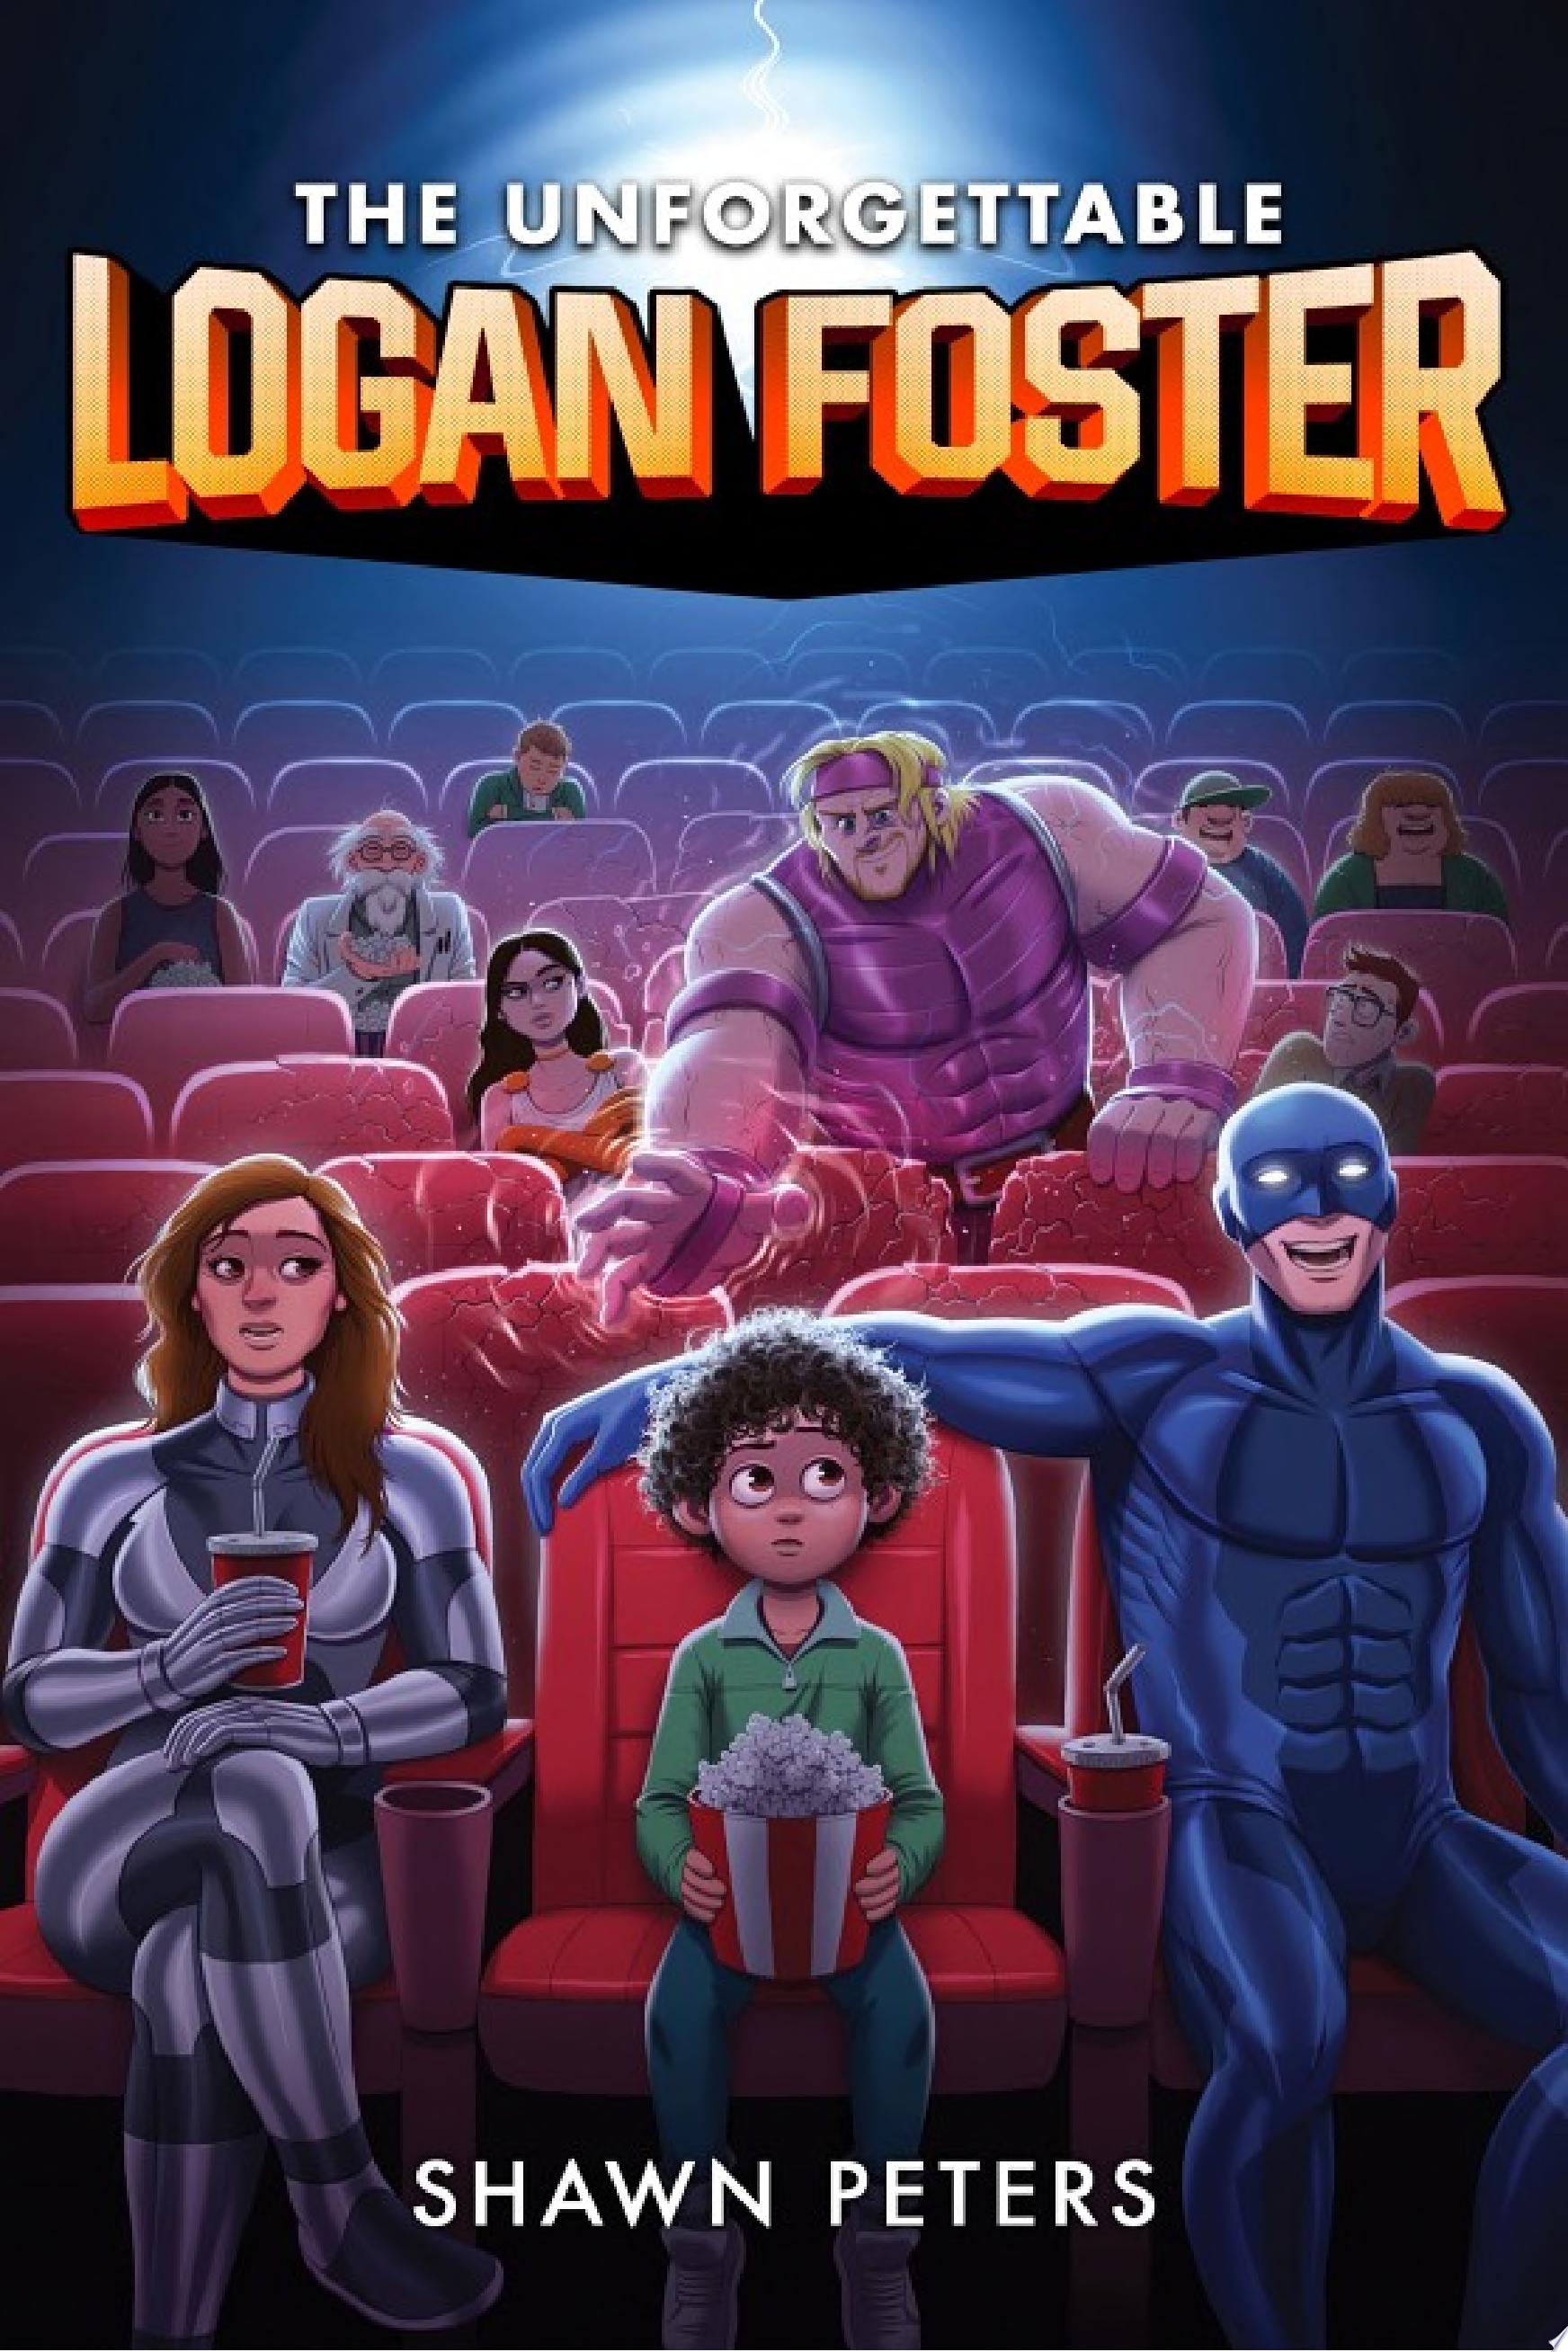 Image for "The Unforgettable Logan Foster #1"